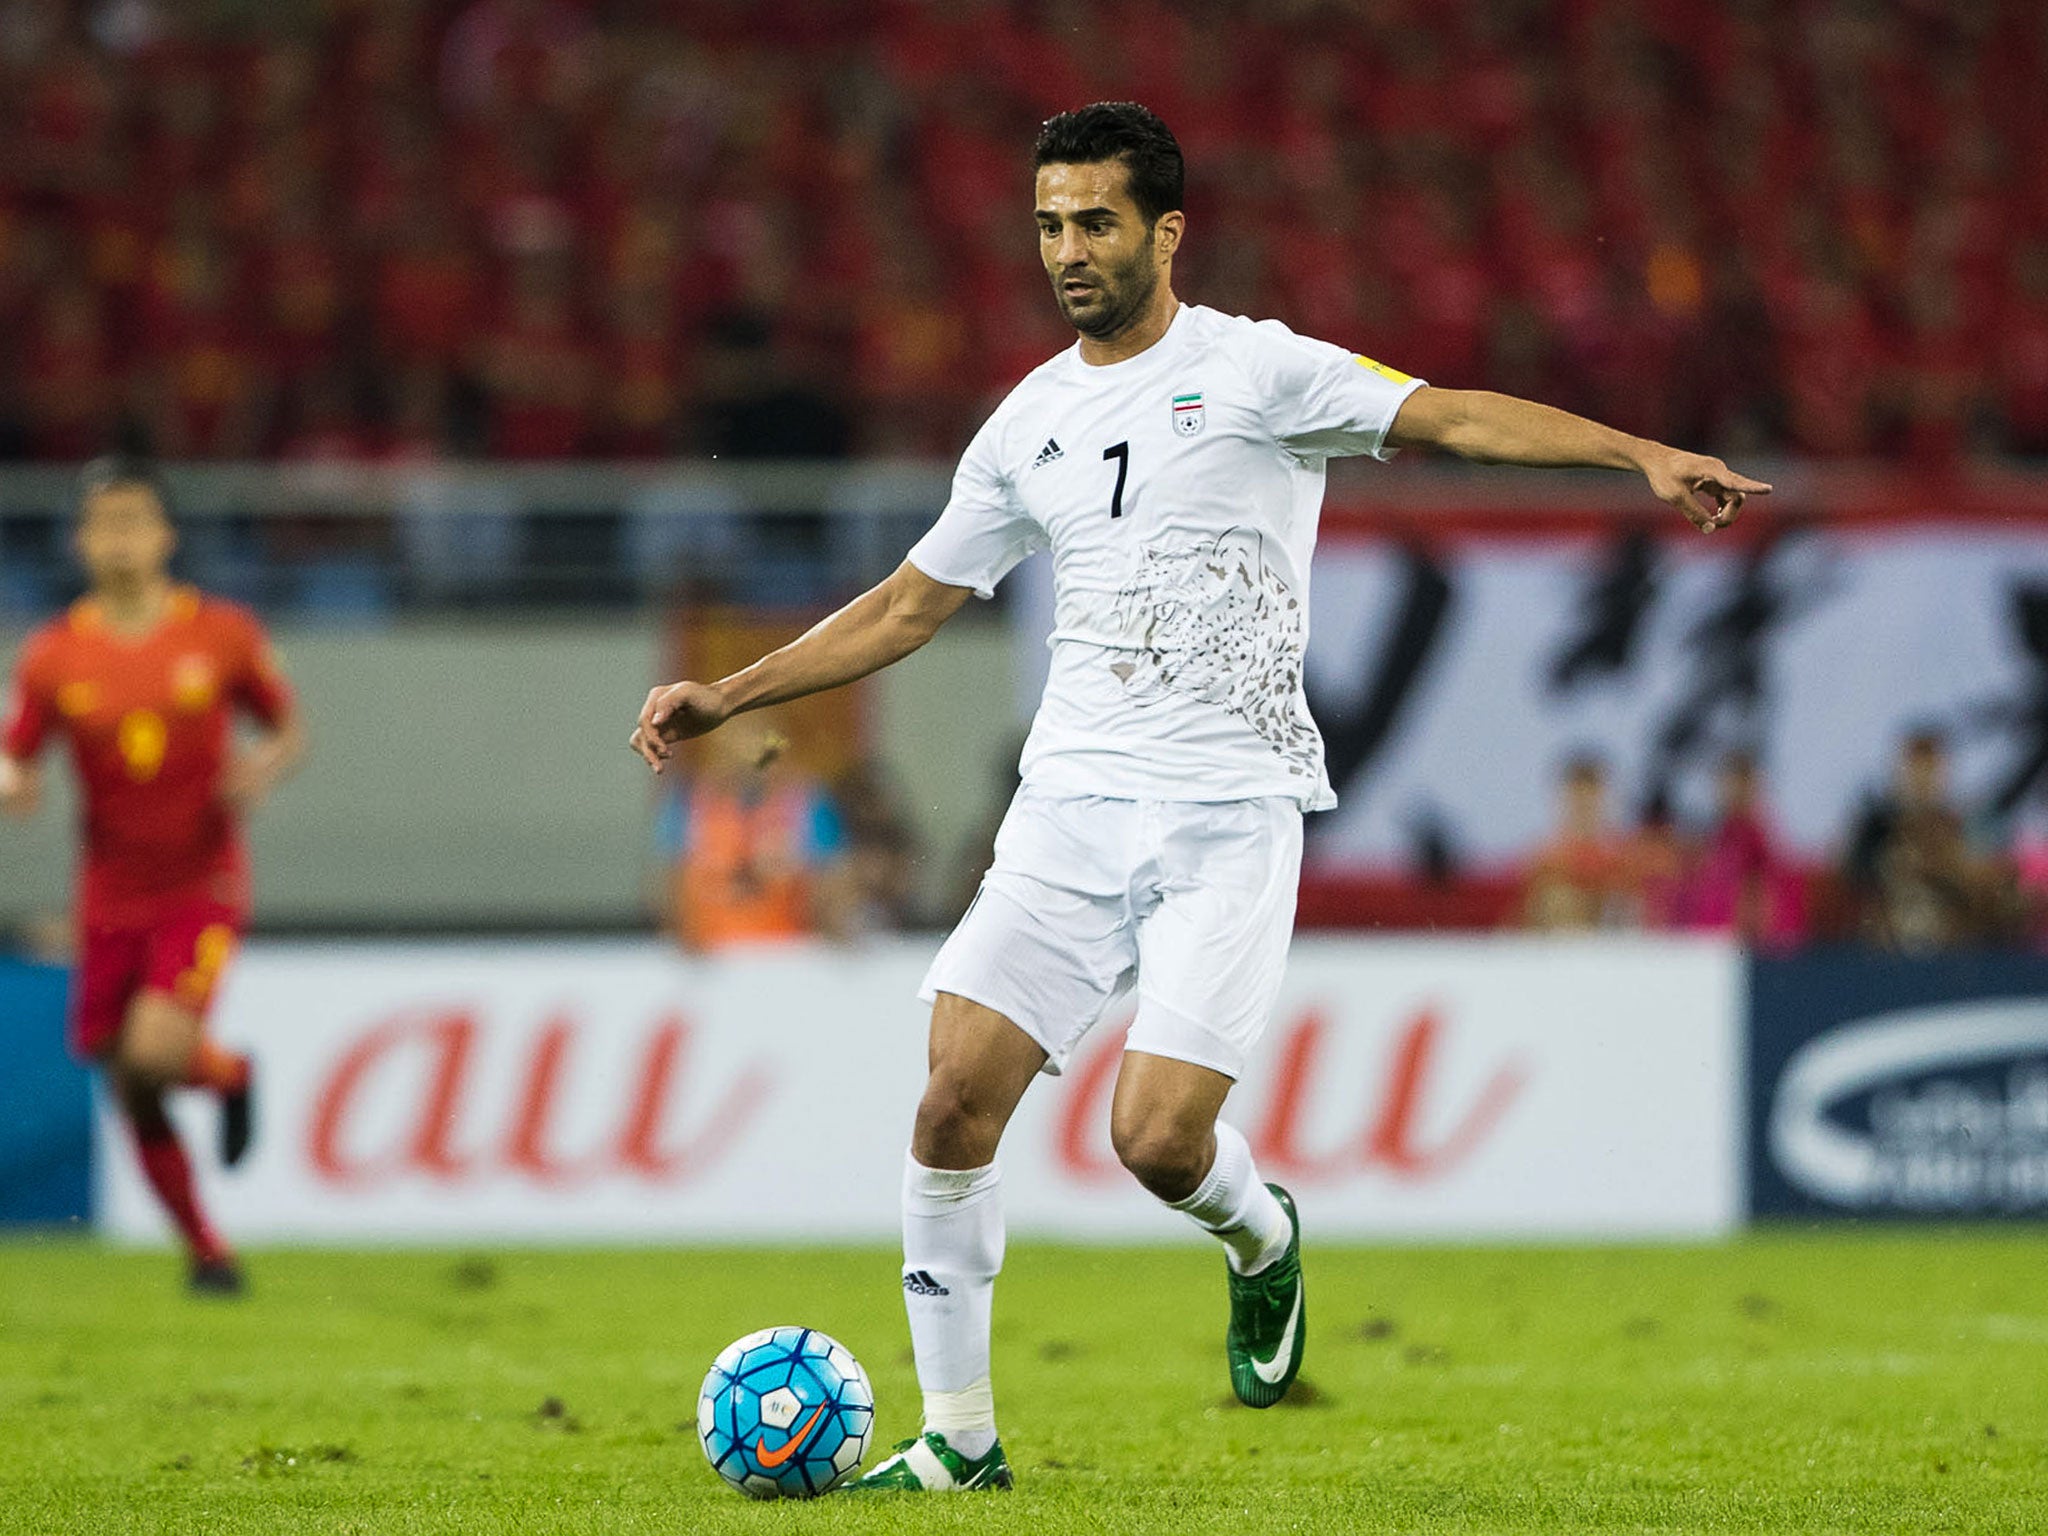 Masoud Shojaei has been named in Iran's provisional squad for the World Cup